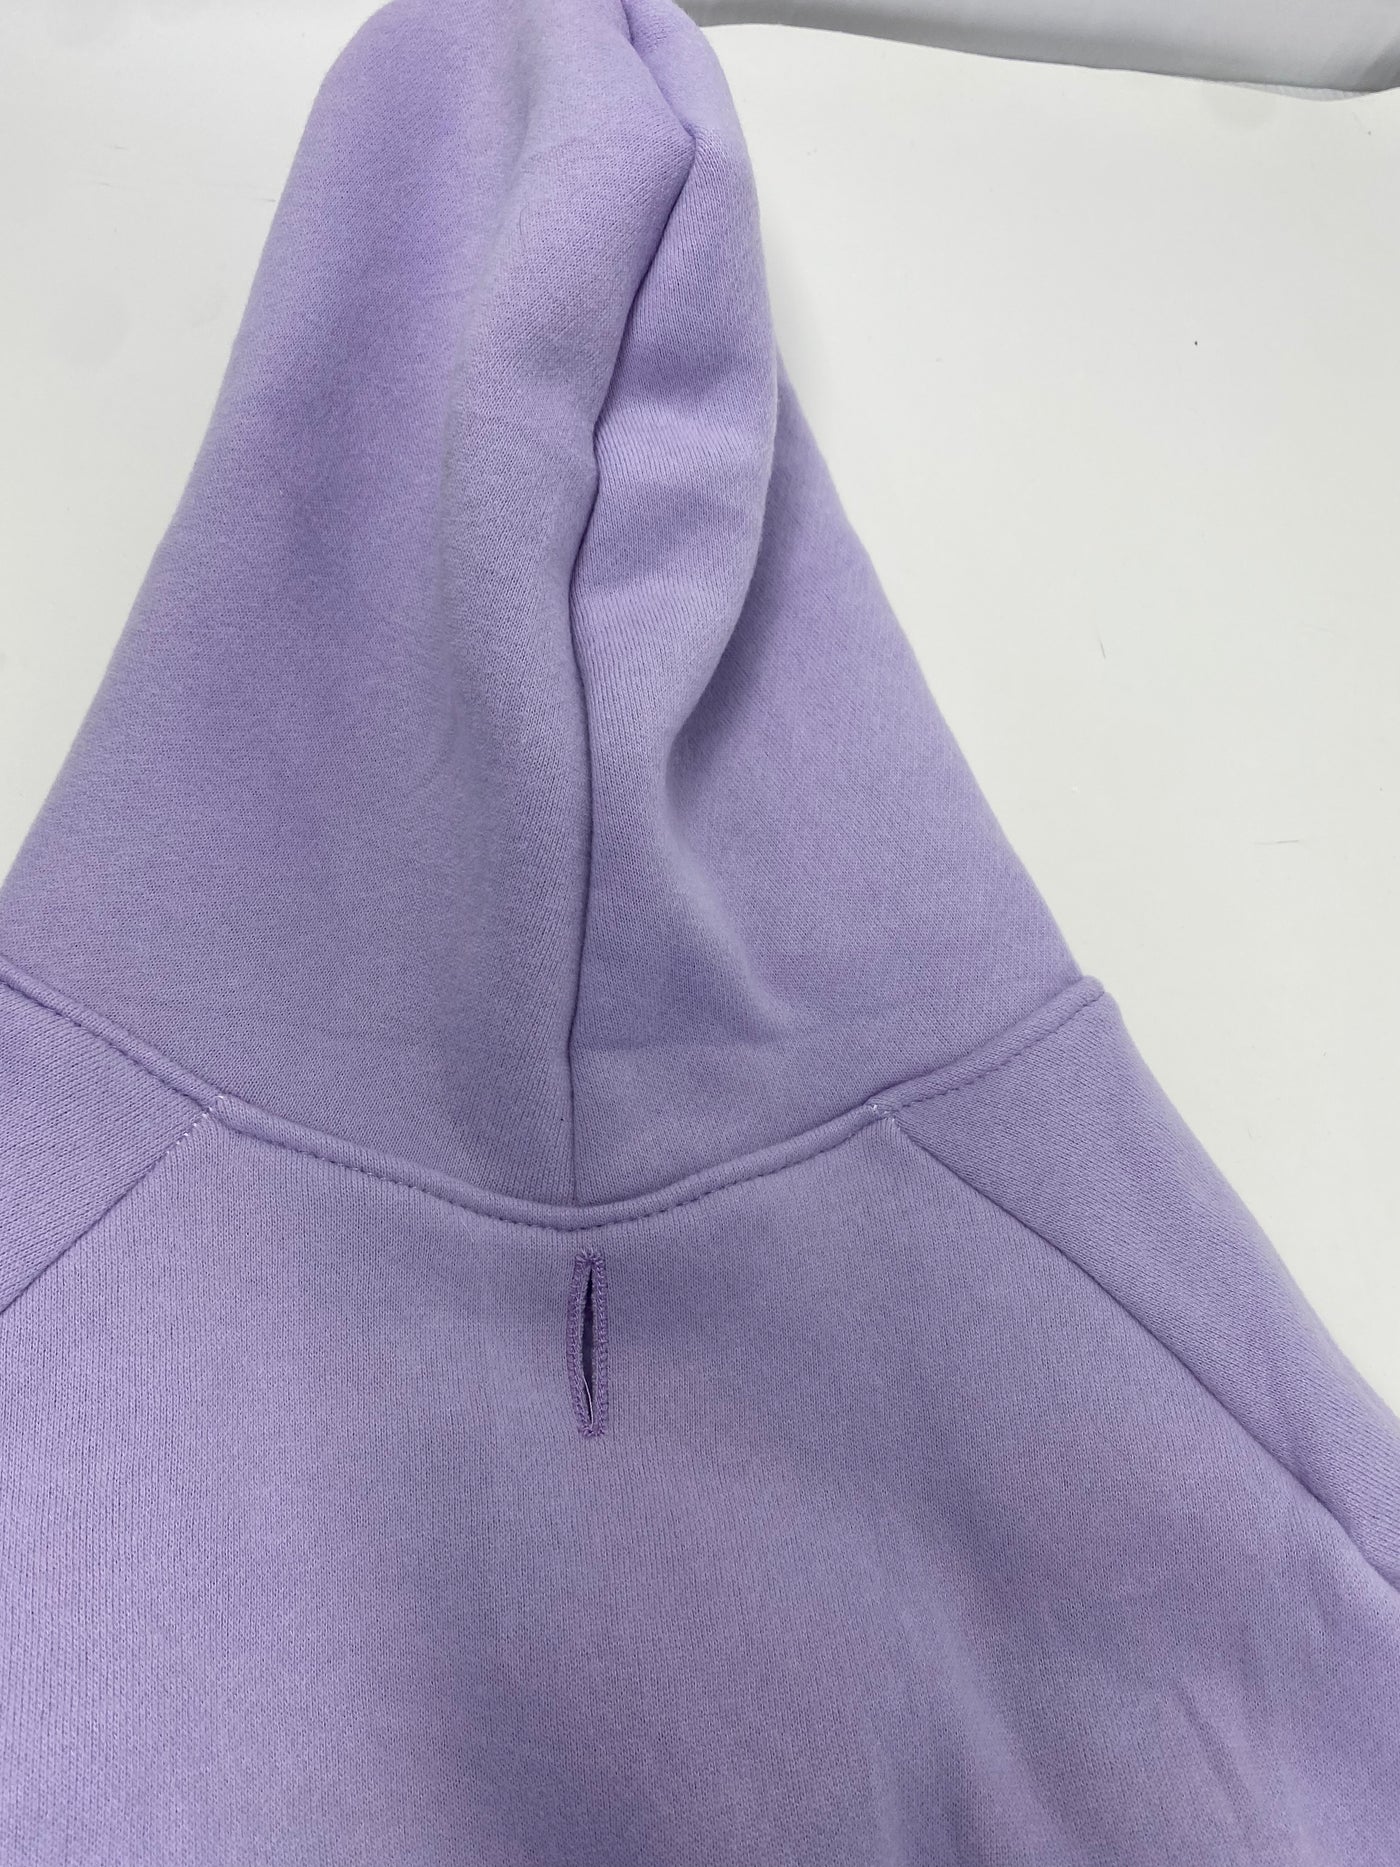 Outlet - XL DOG HOODIE - NO POPPERS - LILAC - 0044